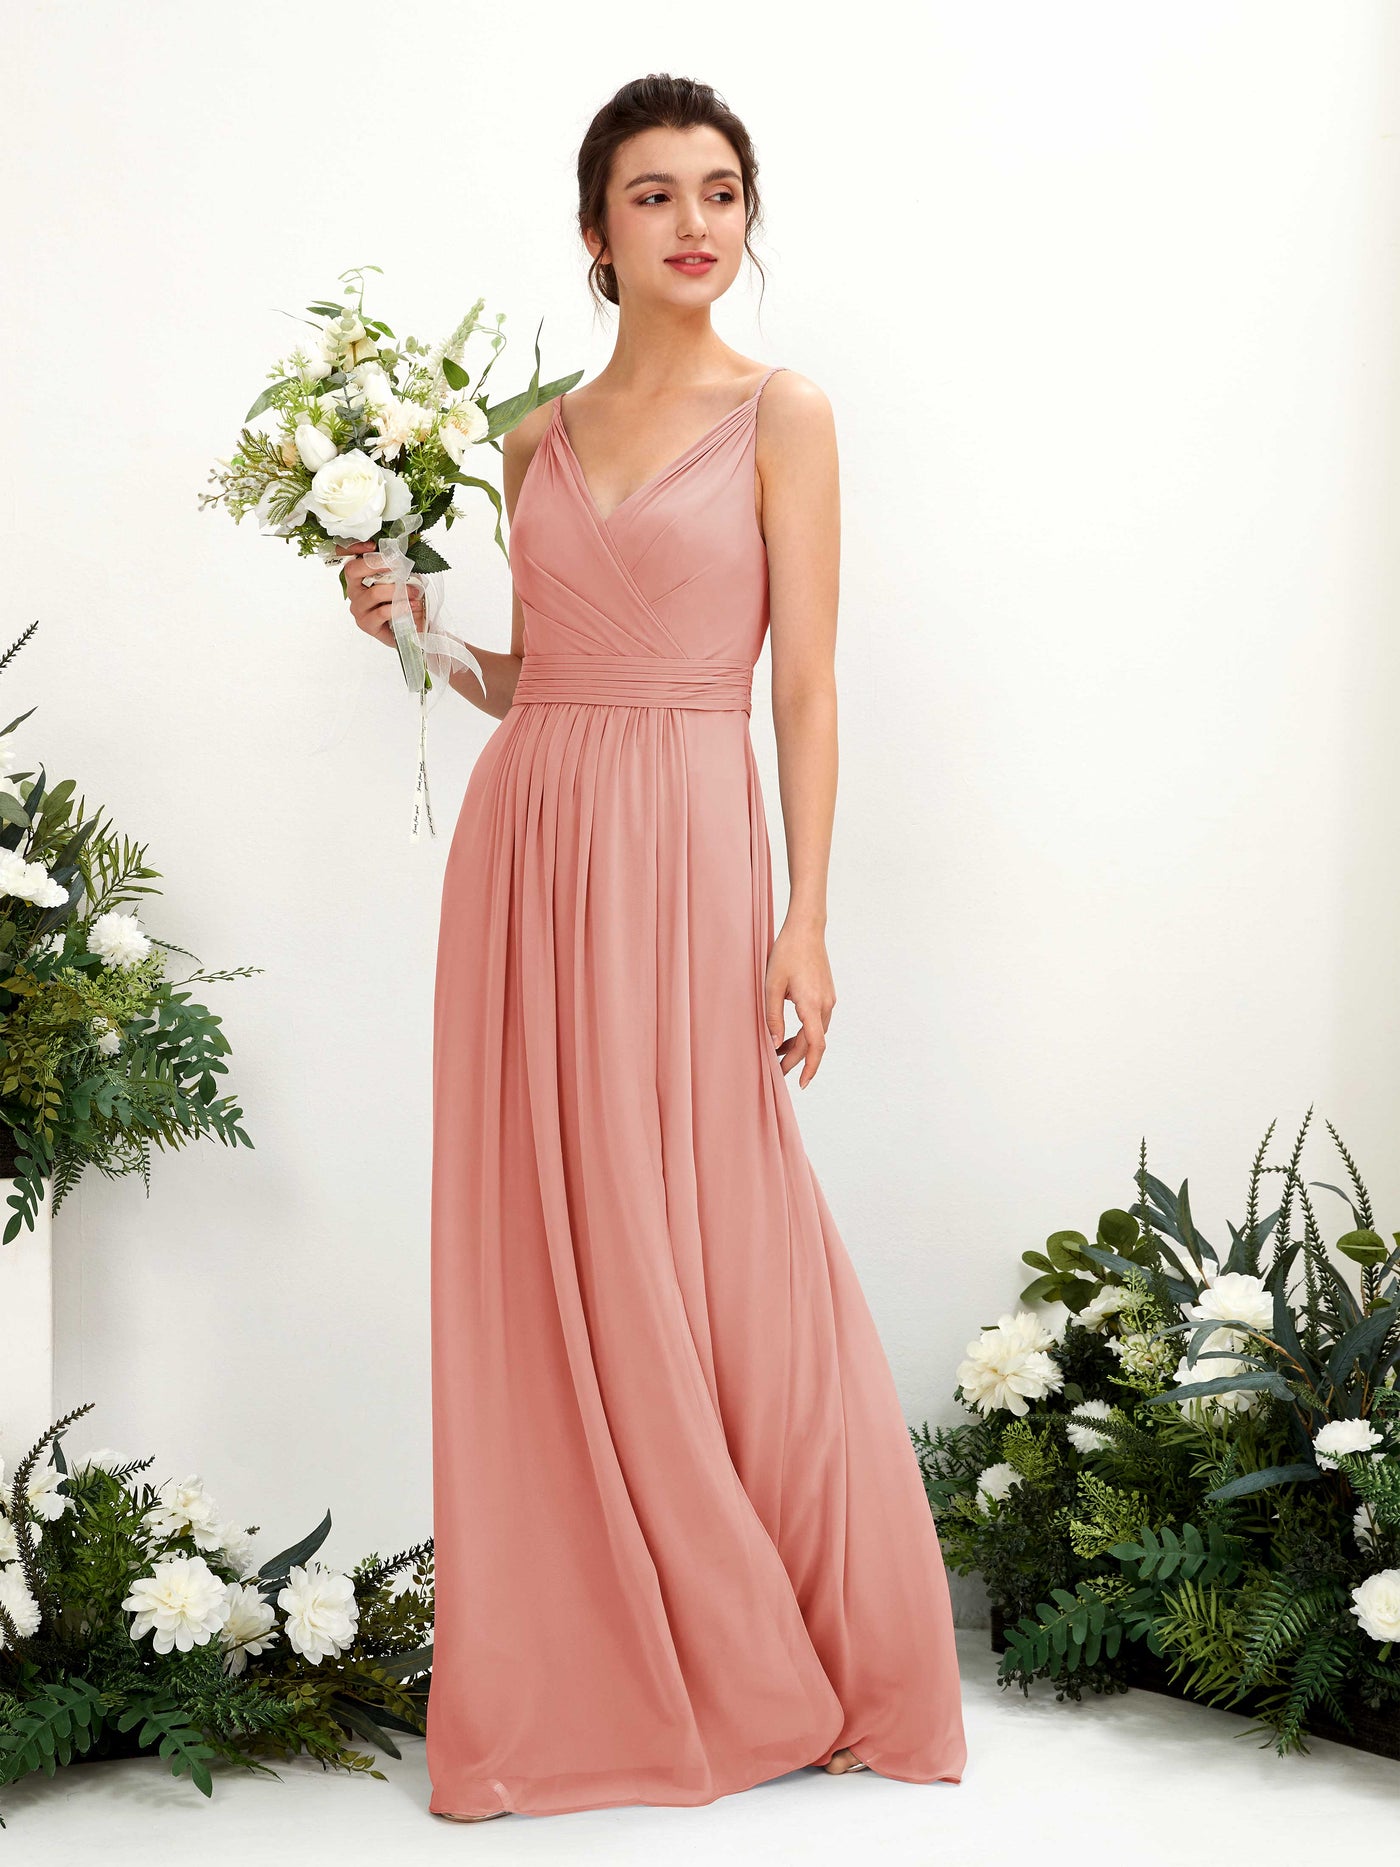 Champagne Rose Bridesmaid Dresses Bridesmaid Dress A-line Chiffon Spaghetti-straps Full Length Sleeveless Wedding Party Dress (81223906)#color_champagne-rose